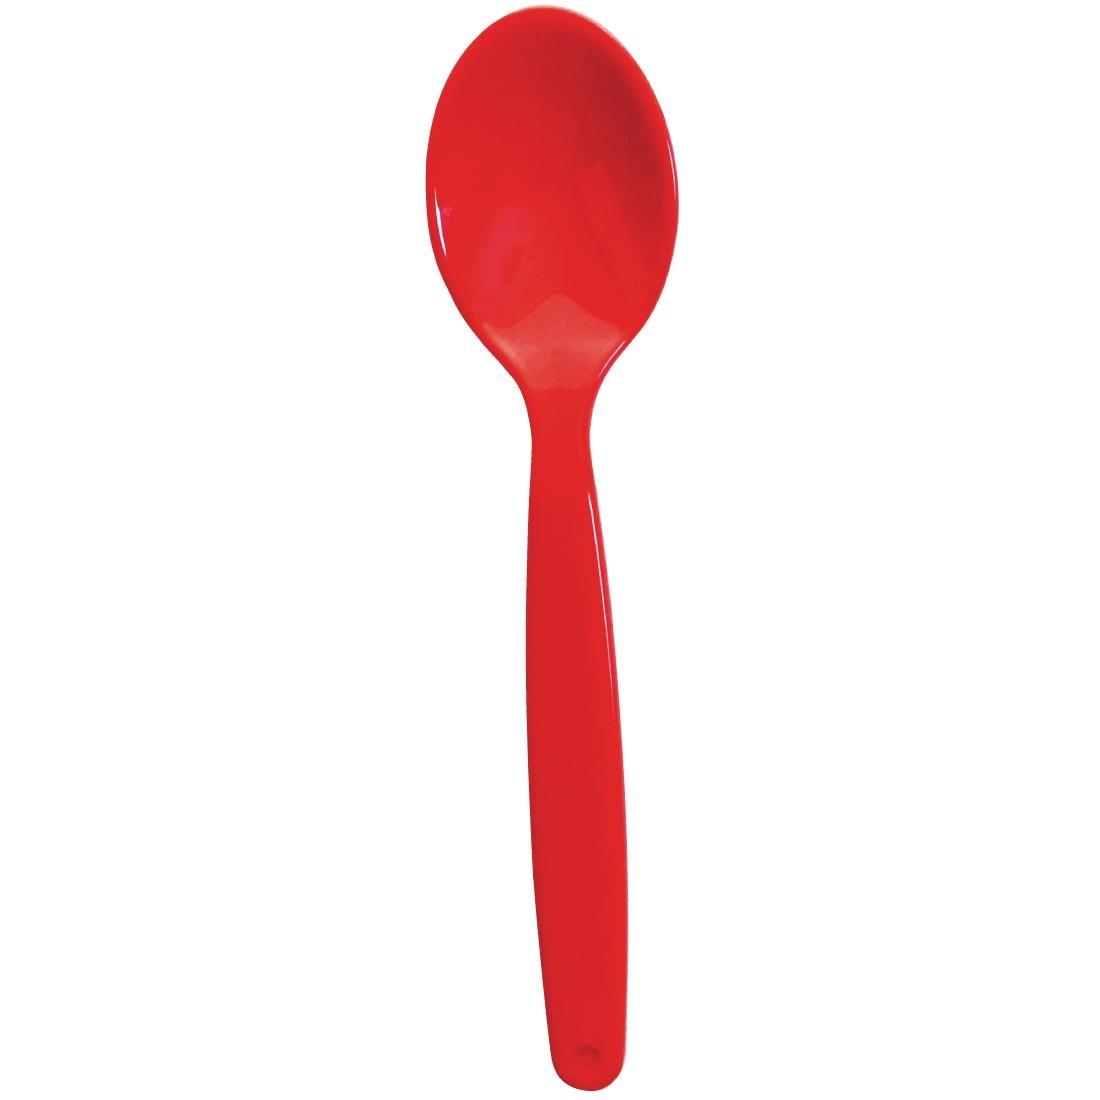 Olympia Kristallon Polycarbonate Spoon Red (Pack of 12) - DL122  - 2